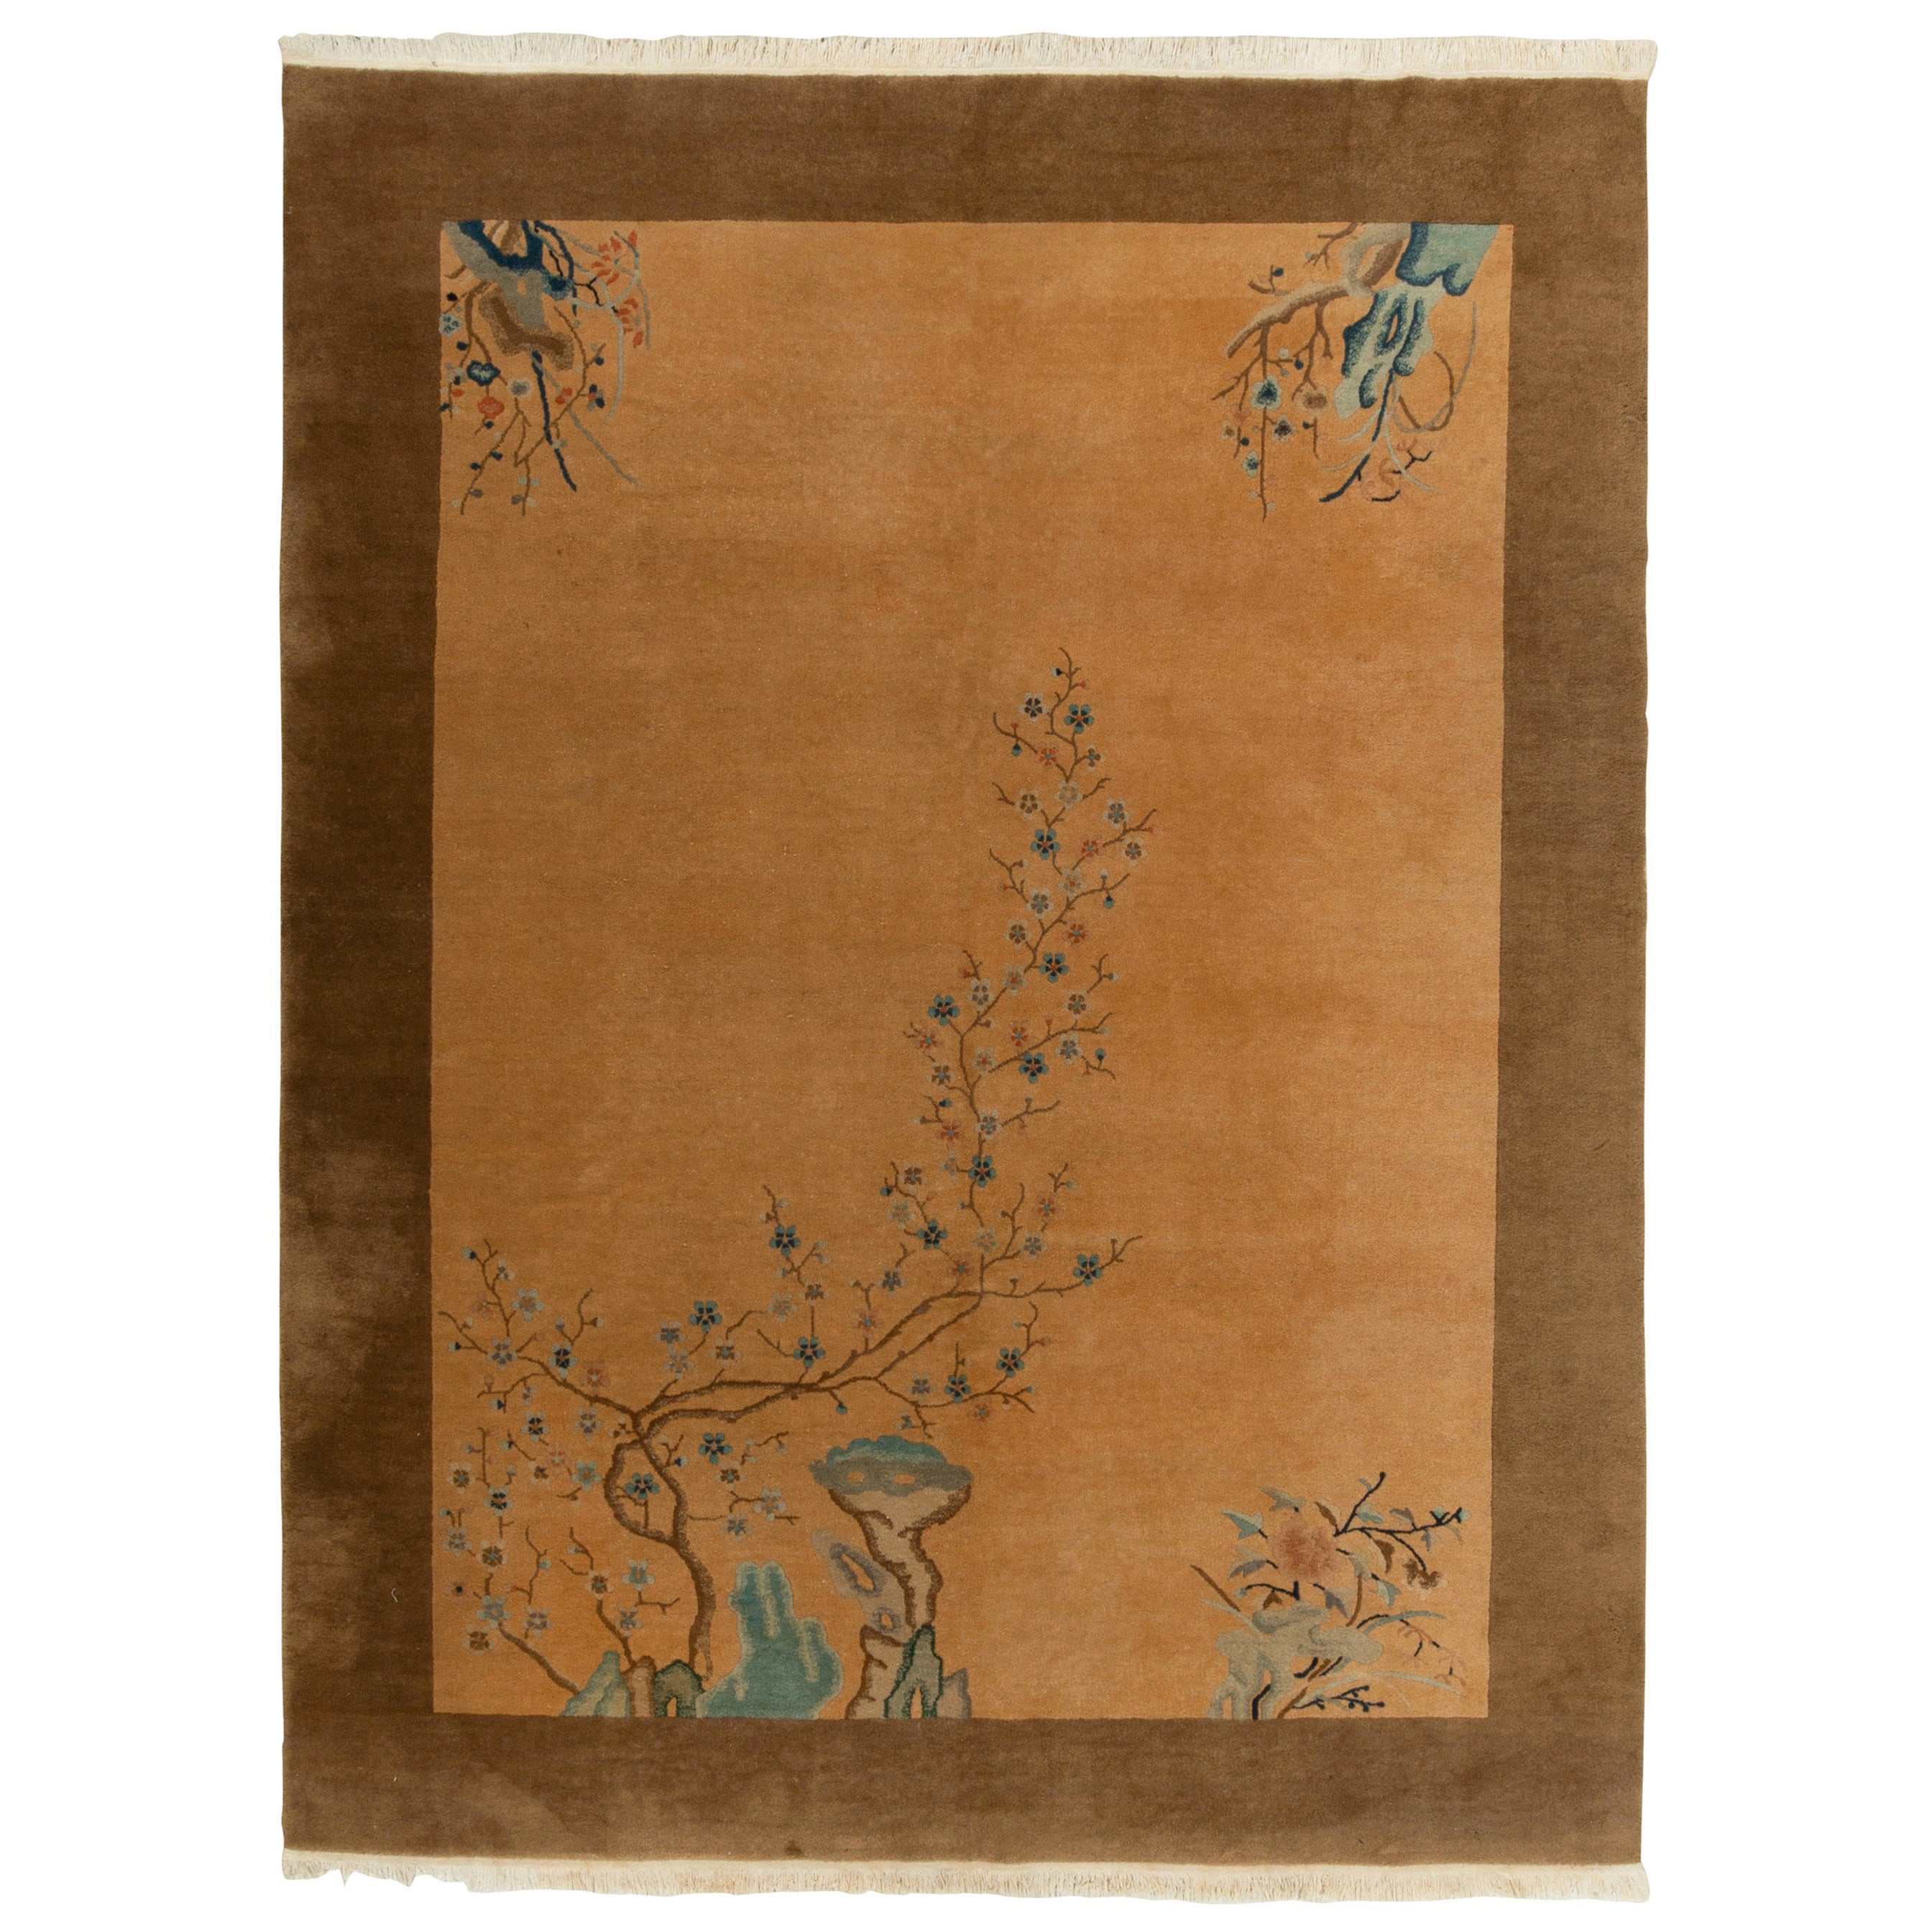 Antique Chinese Art Deco Rug in Gold, Beige-Brown & Blue Floral Patterns